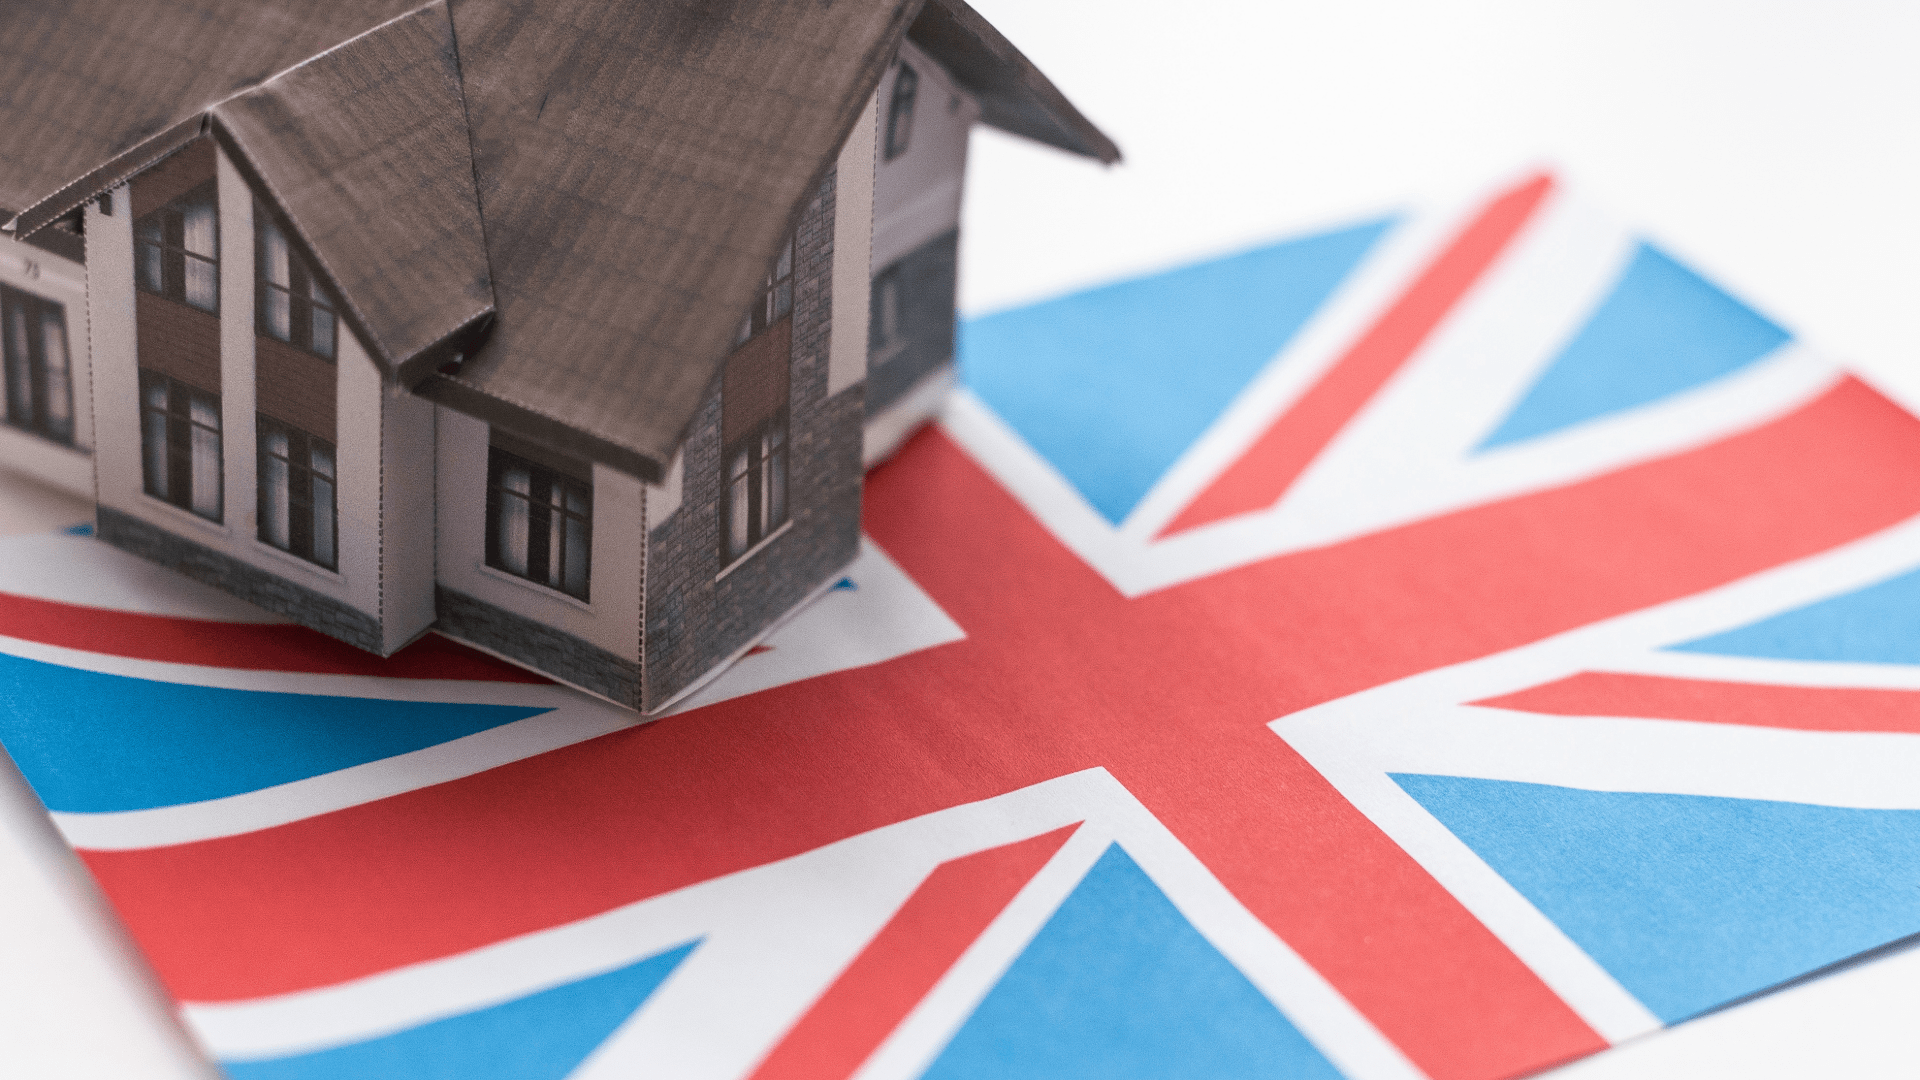 A miniature model of a house resting on a printed Union Jack flag, symbolizing the connection between residential property and national identity in the UK.